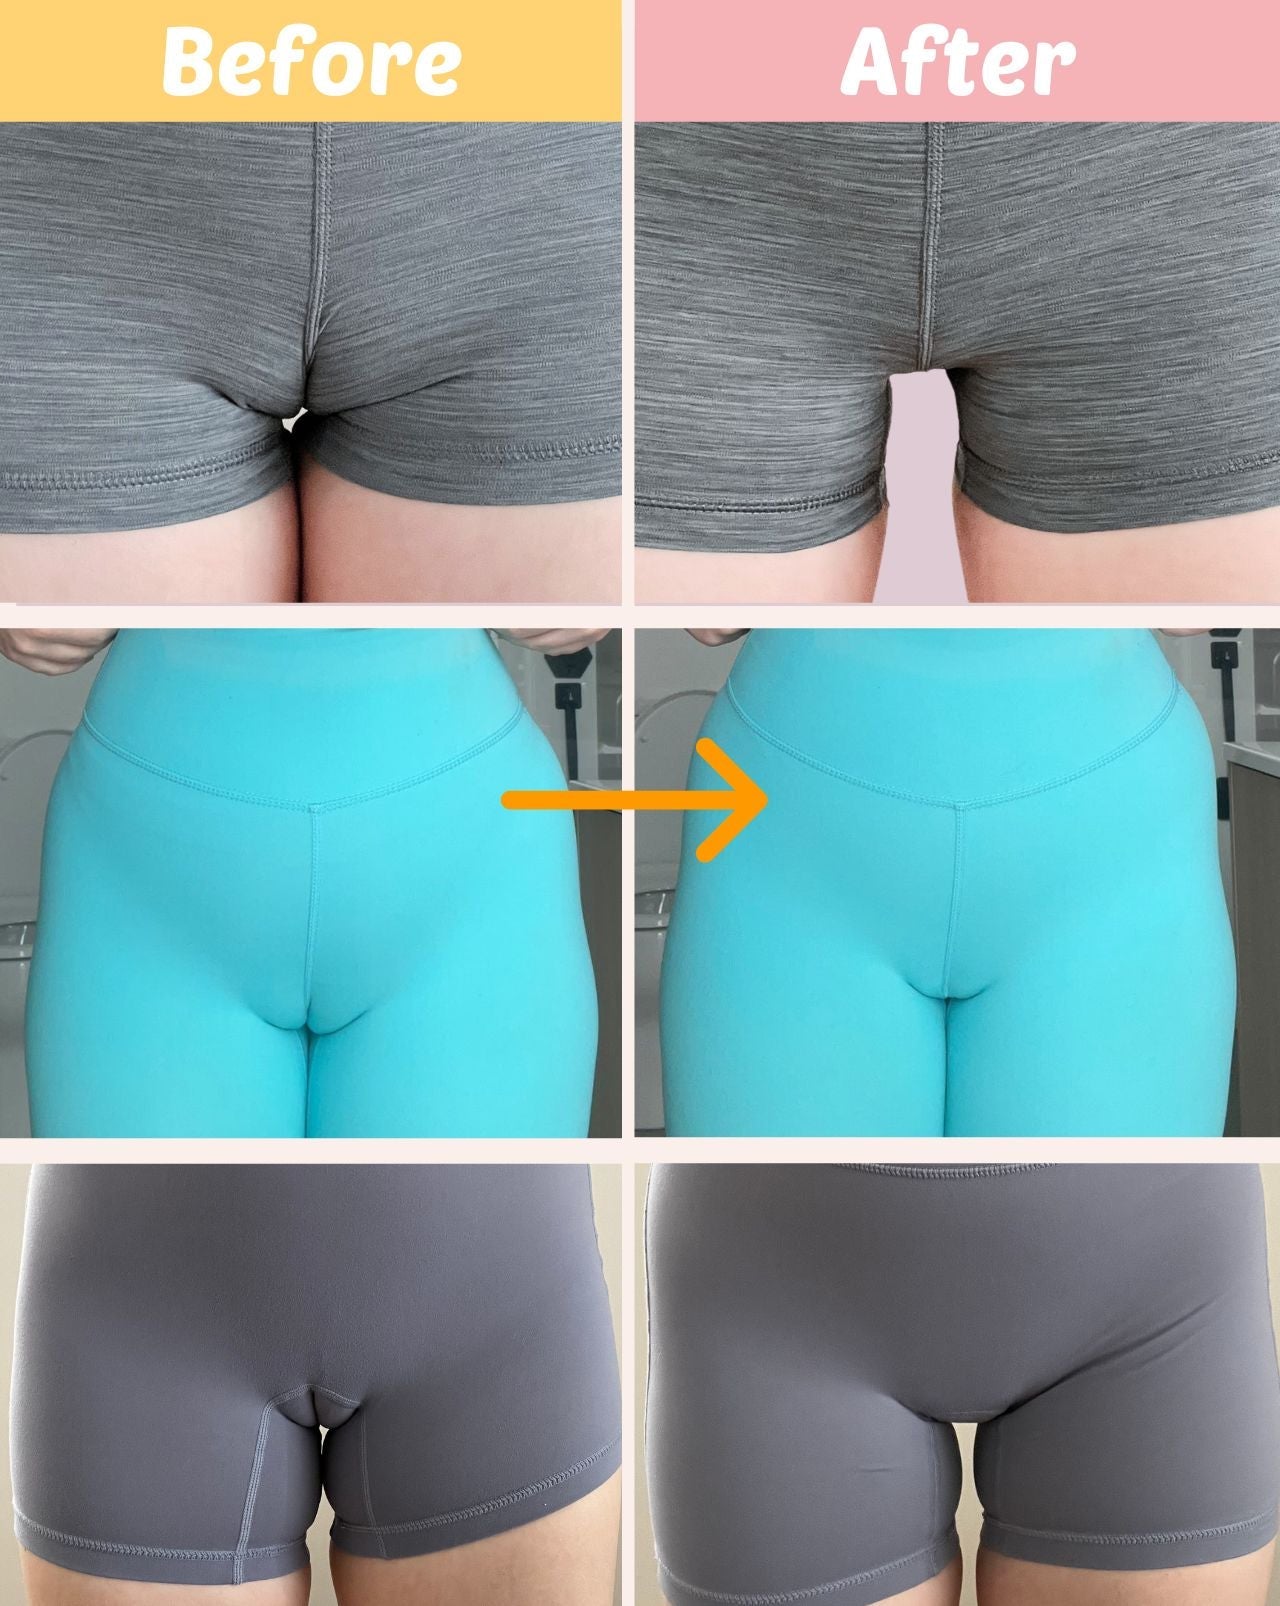 T-front thong leotards are used not only as dance underwear but also for  daily wear. They are surprisingly comfortable! - 9GAG